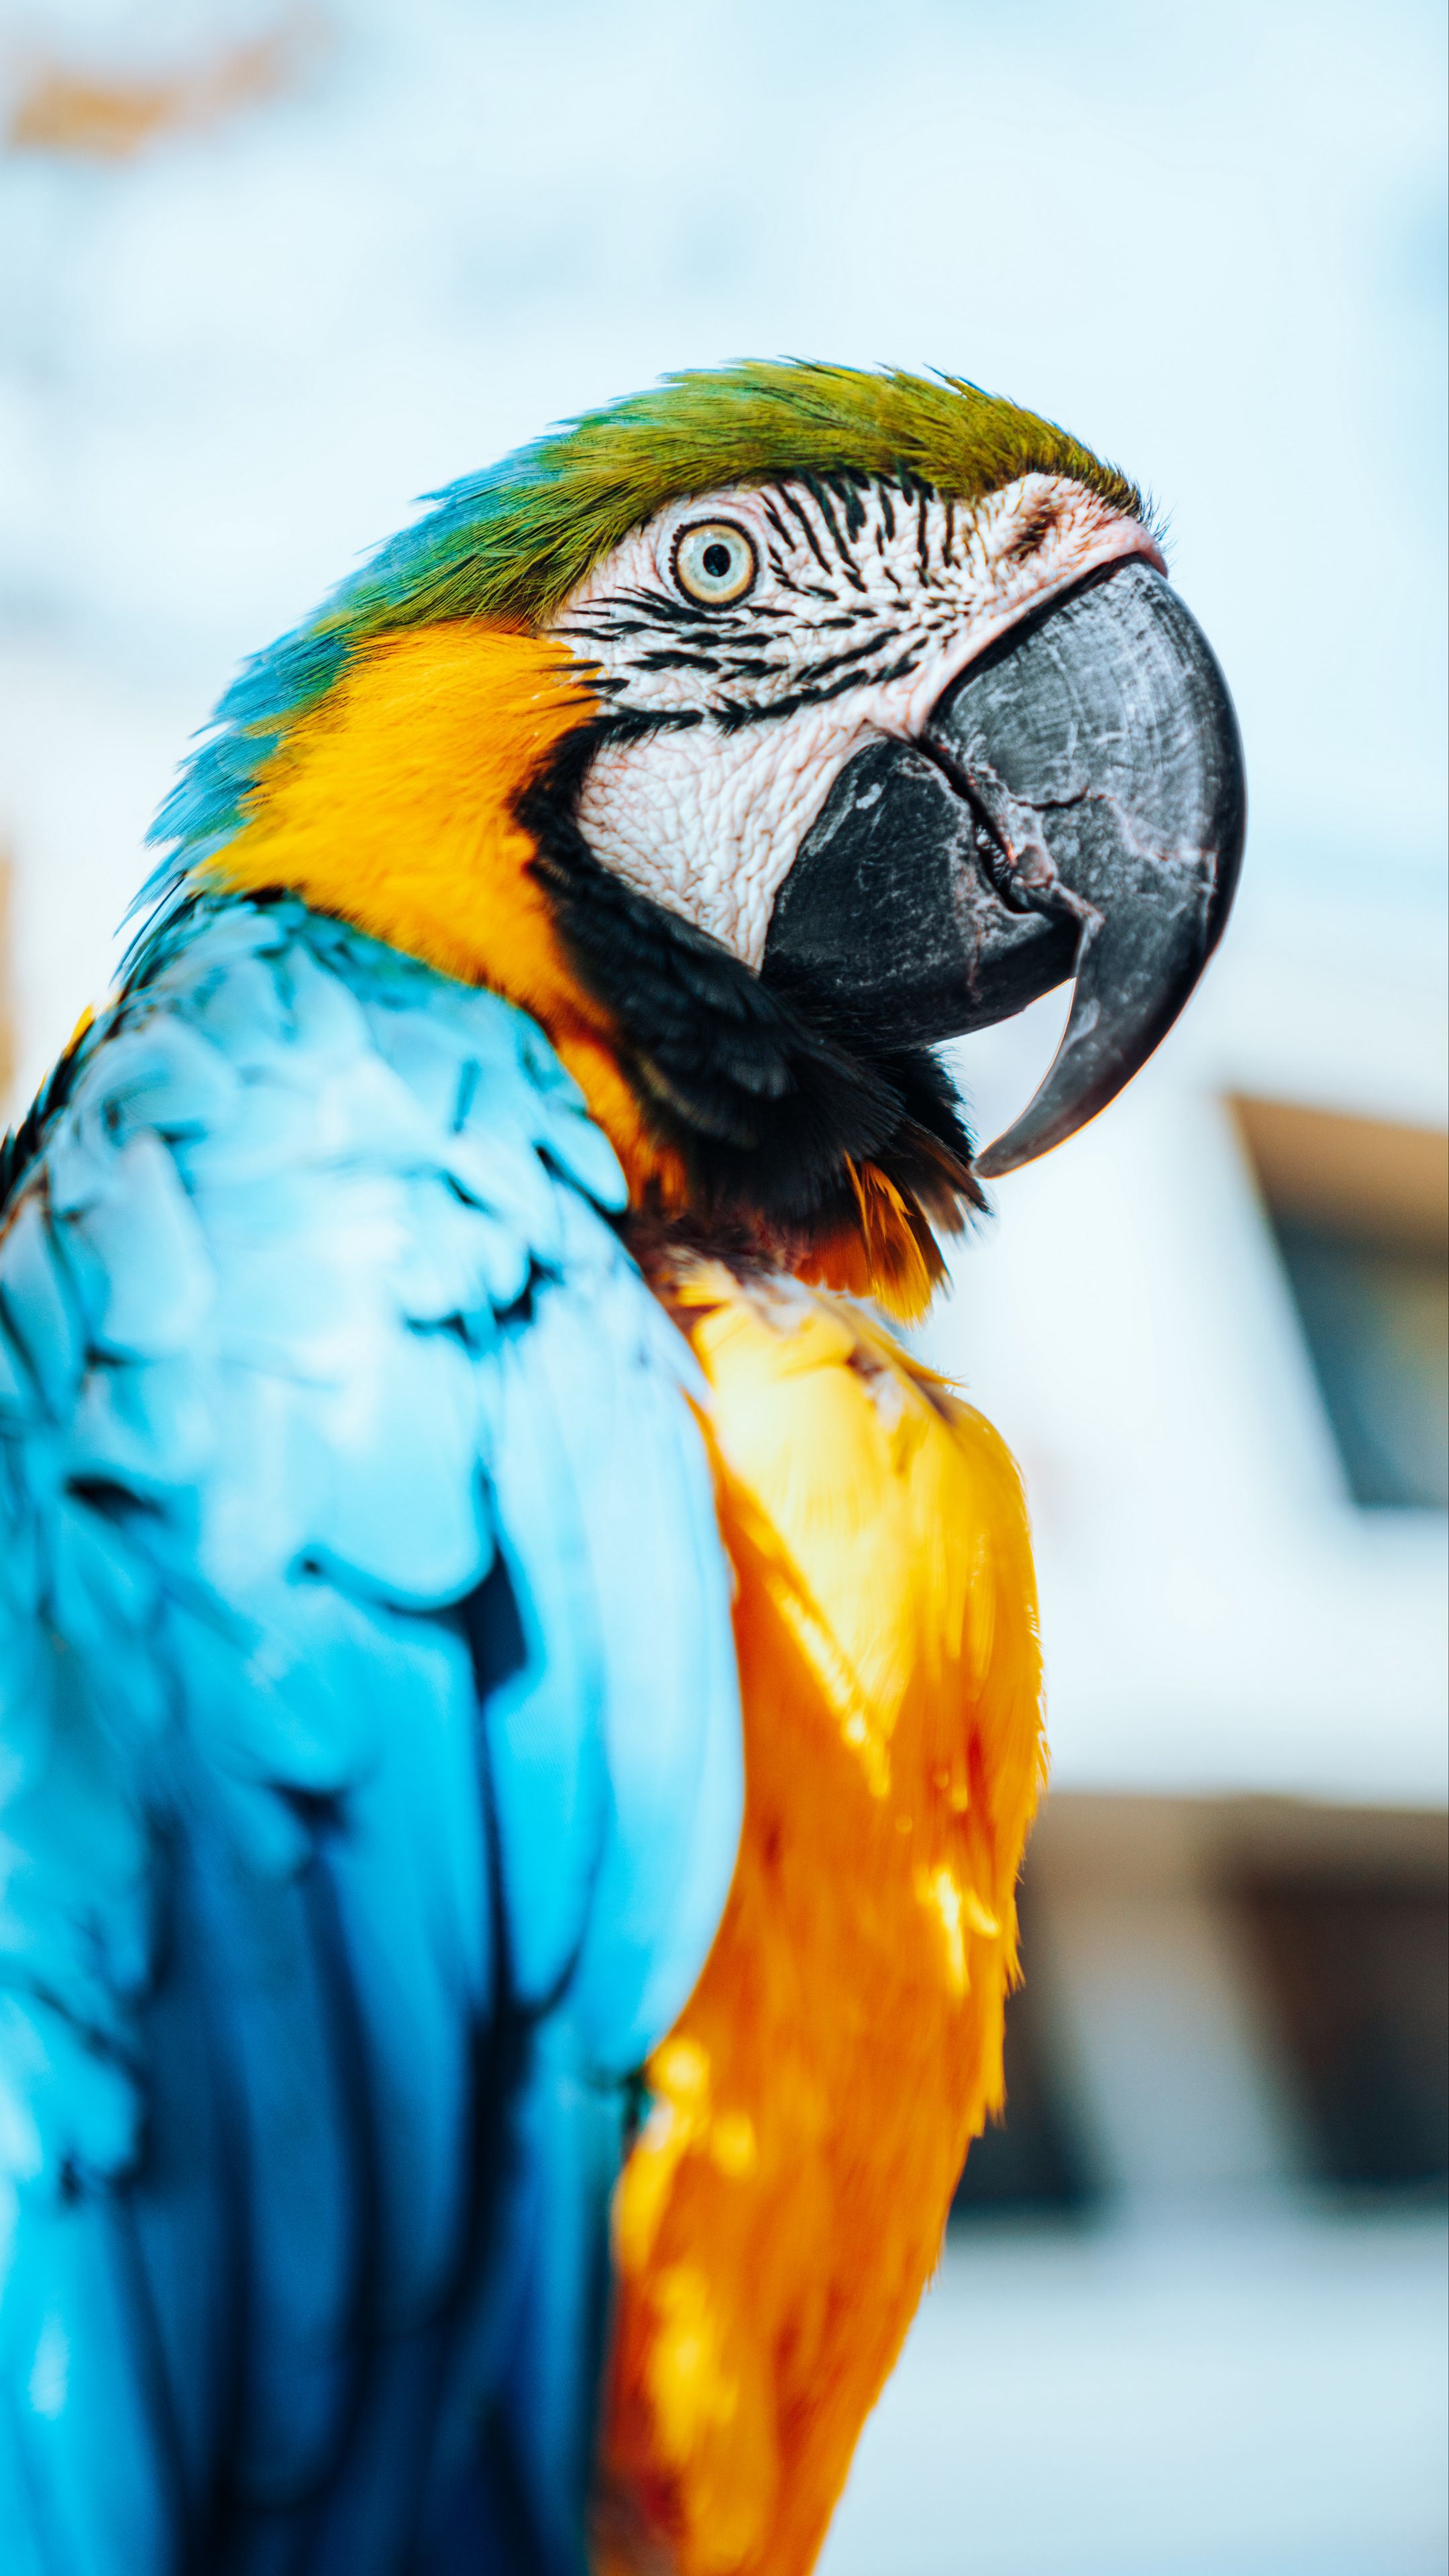 Wallpaper Macaw Parrot Bird Colorful